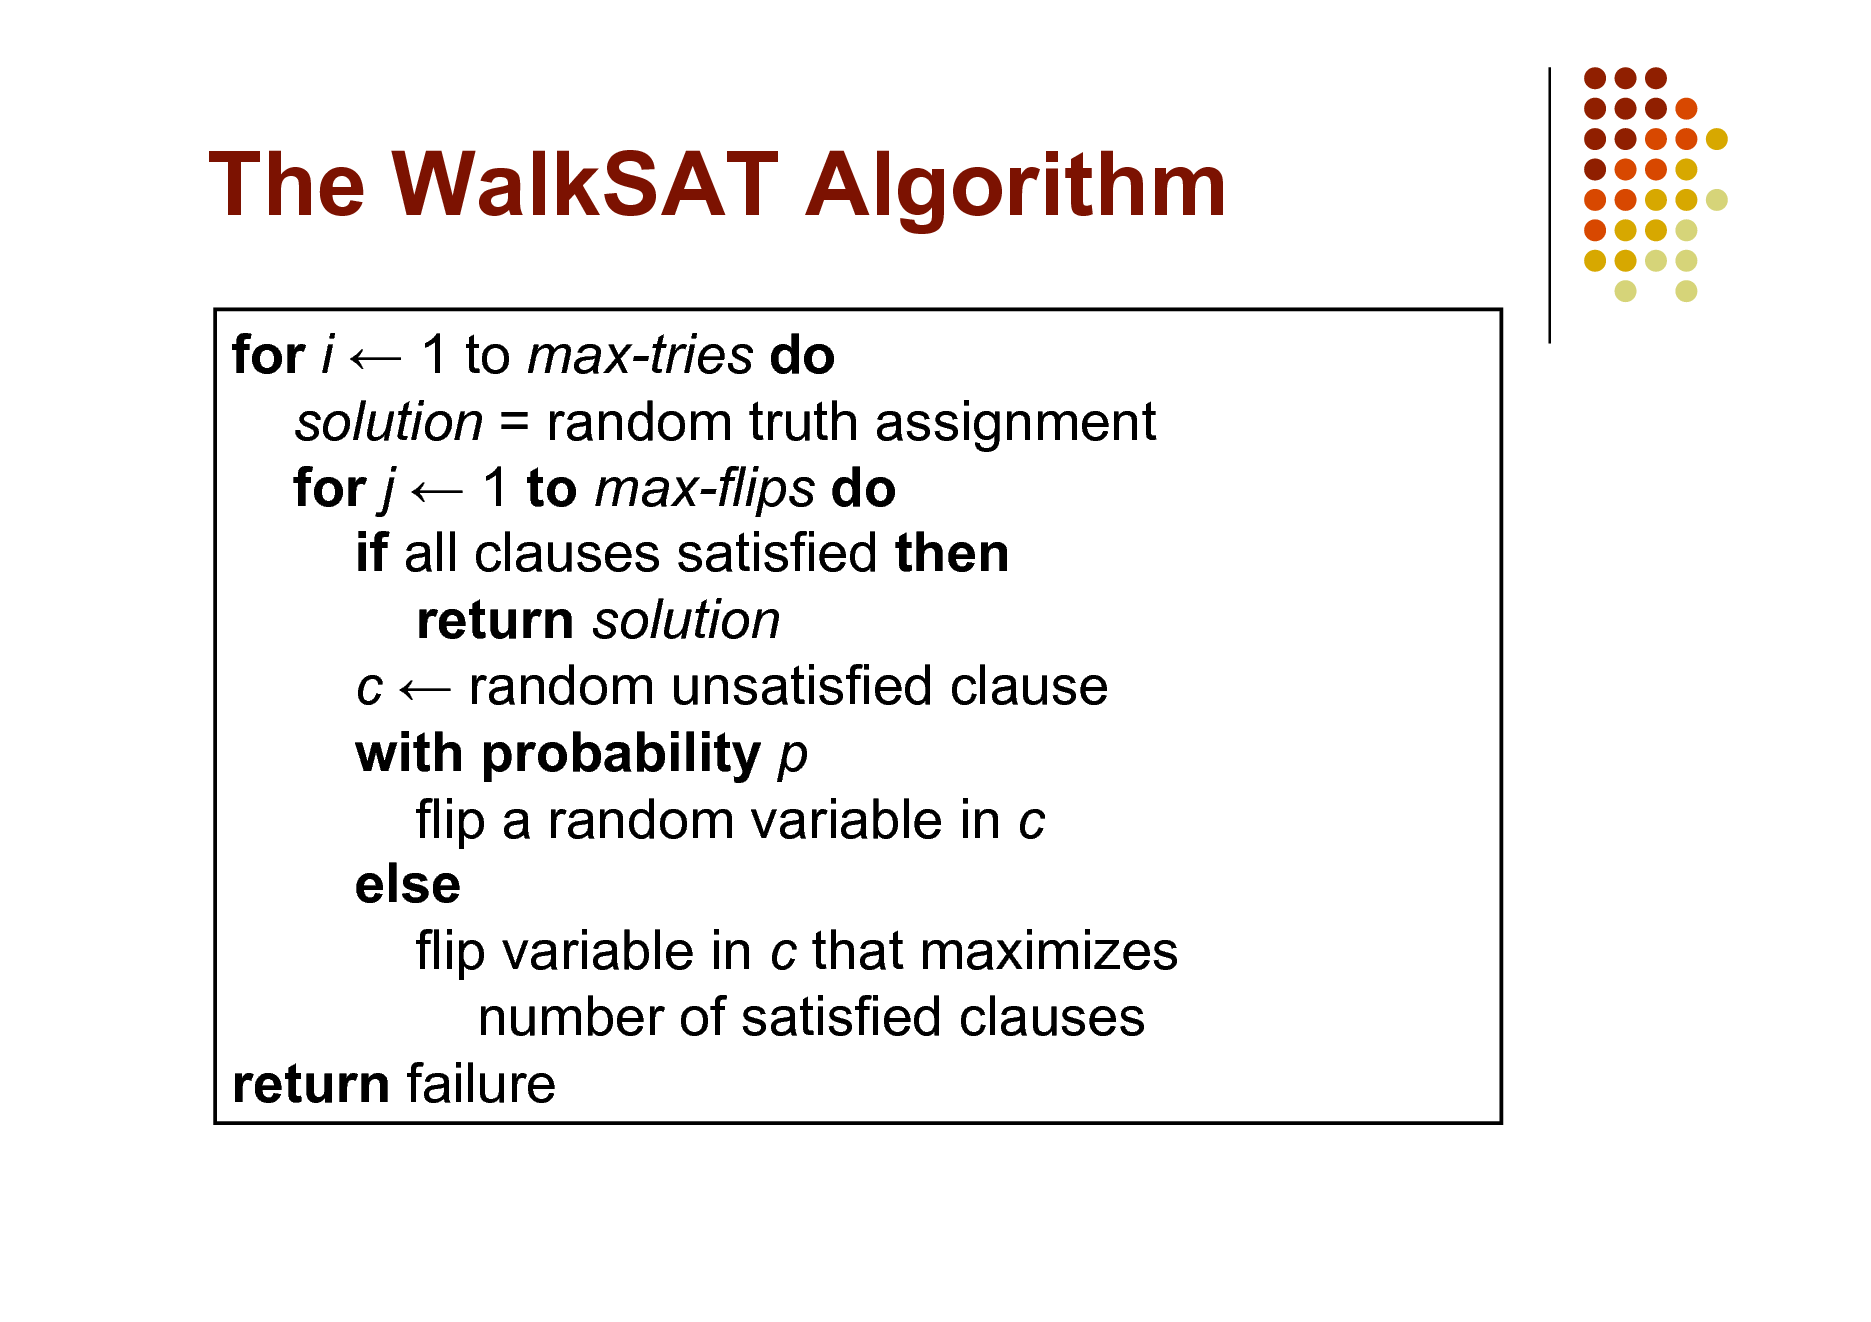 Slide: The WalkSAT Algorithm
for i  1 to max-tries do solution = random truth assignment for j  1 to max-flips do if all clauses satisfied then return solution c  random unsatisfied clause with probability p flip a random variable in c else flip variable in c that maximizes number of satisfied clauses return failure

